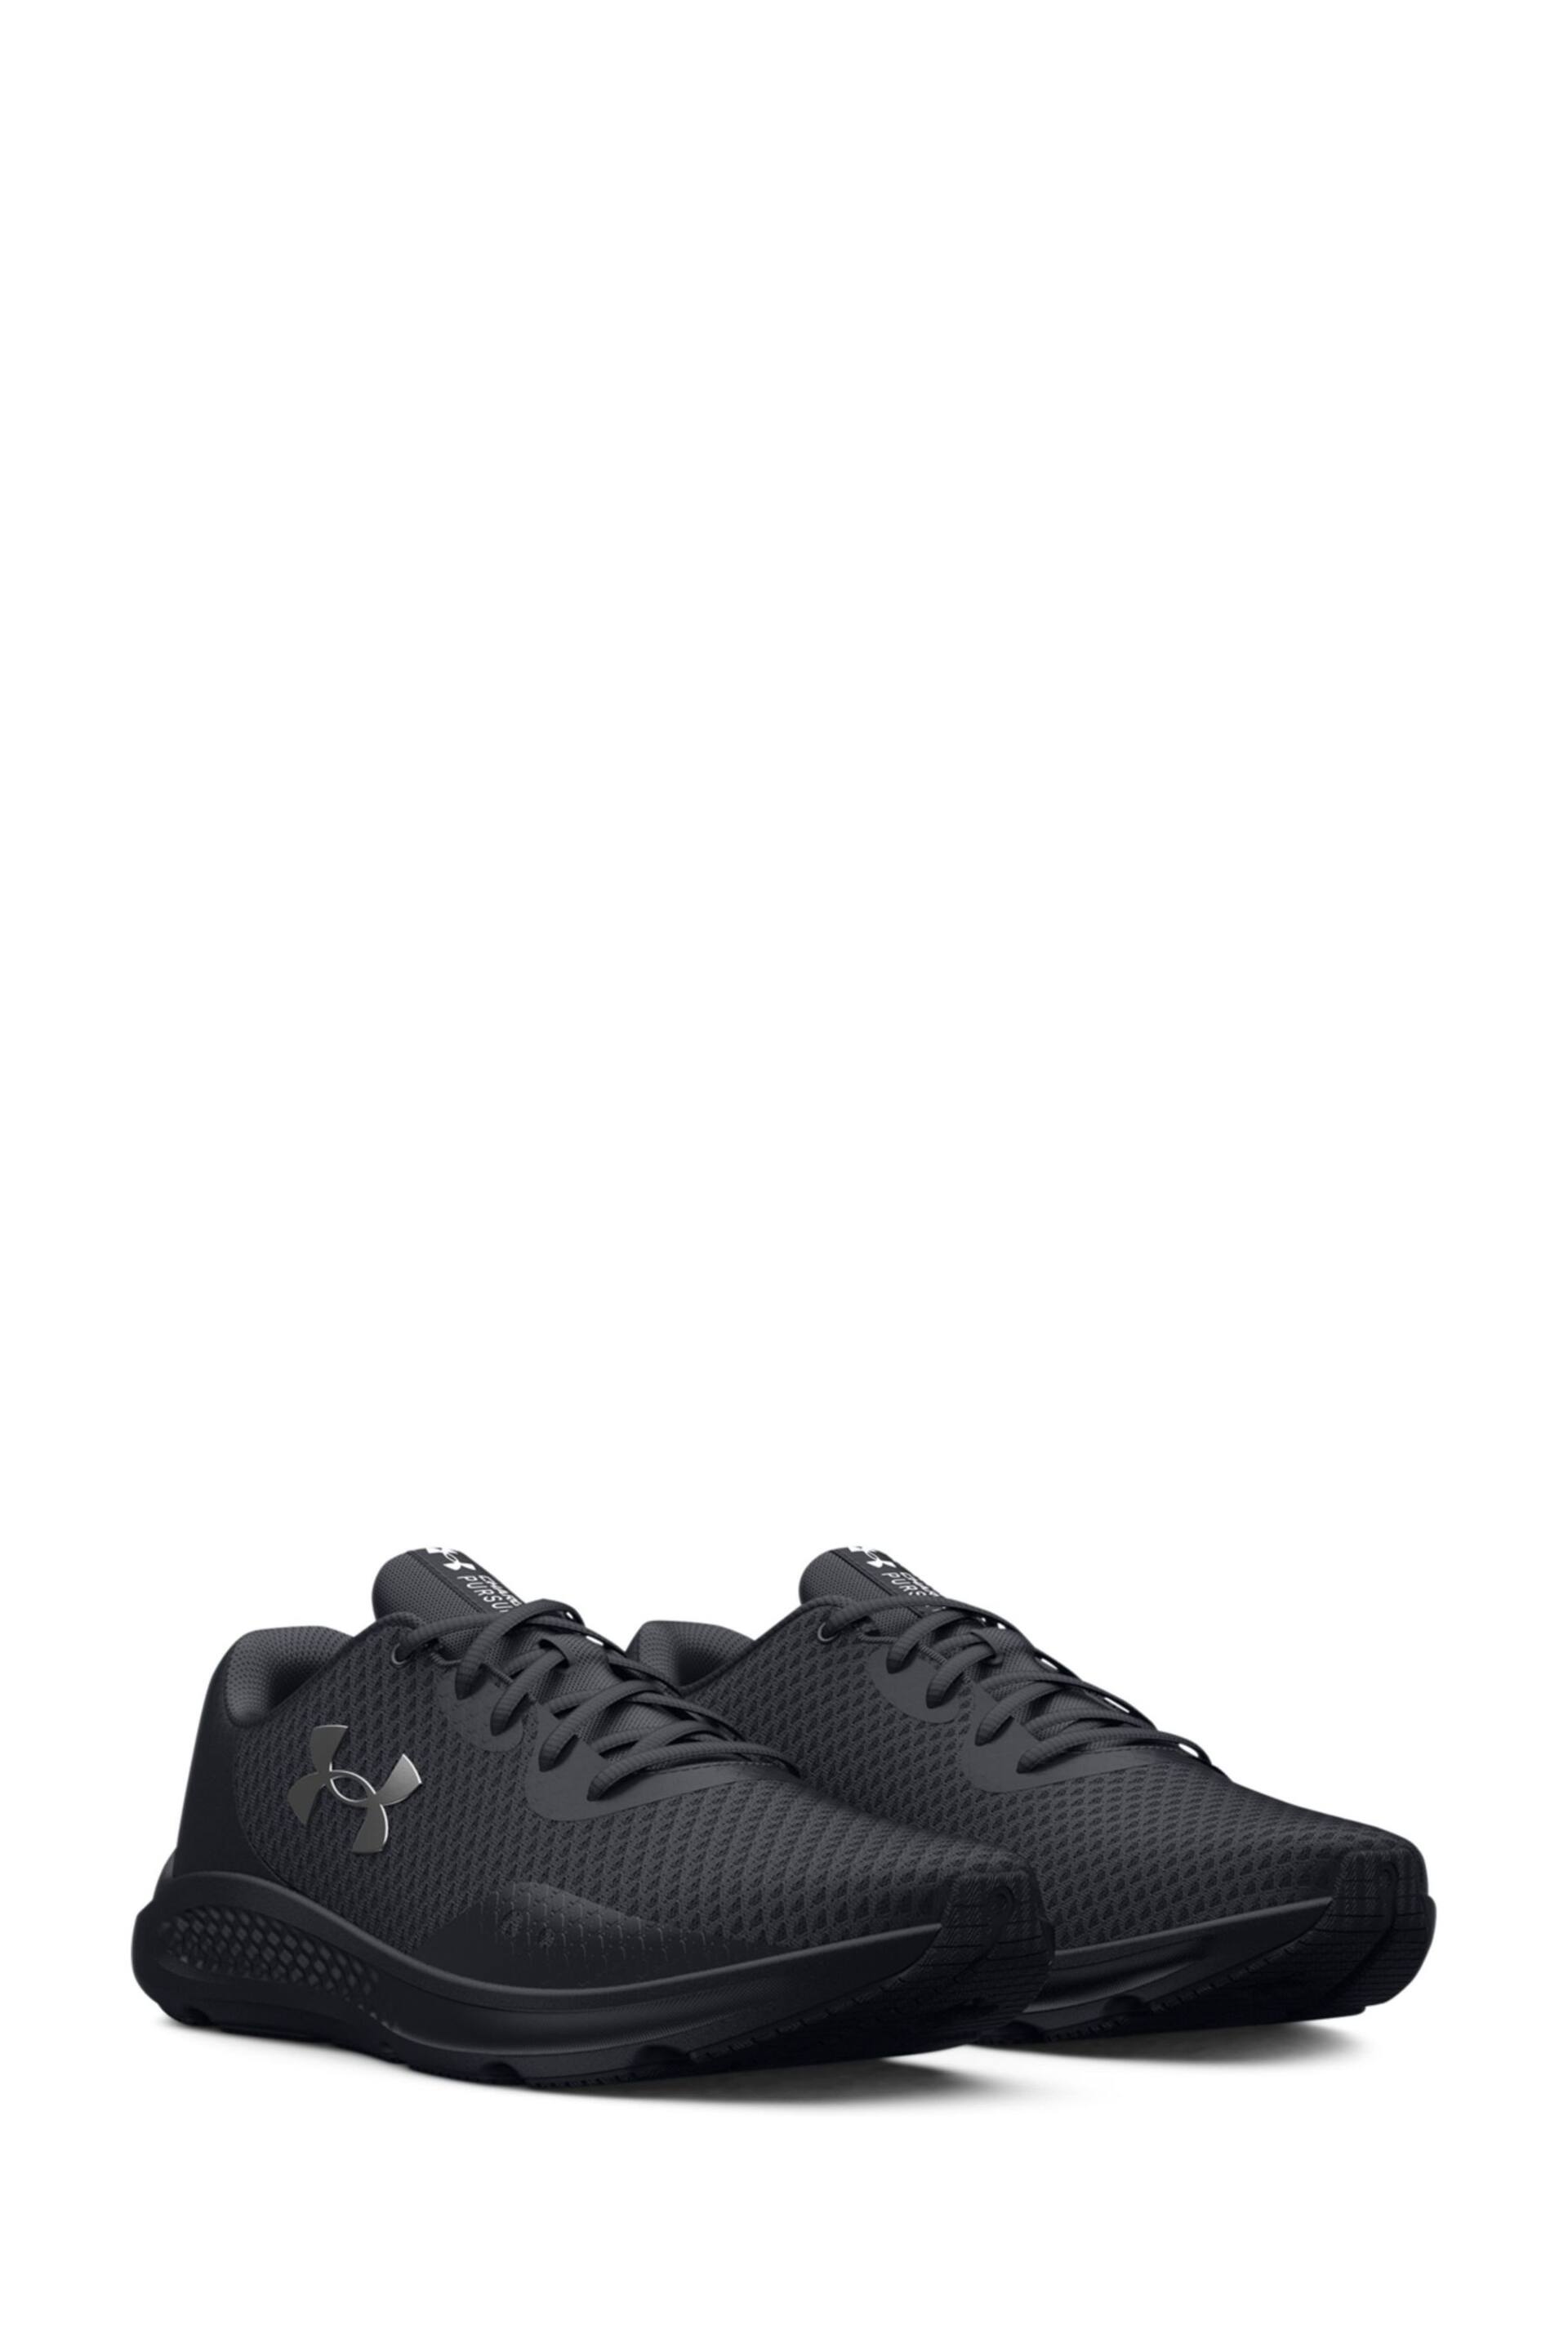 Under Armour Dark Black Charged Pursuit 3 Trainers - Image 4 of 8